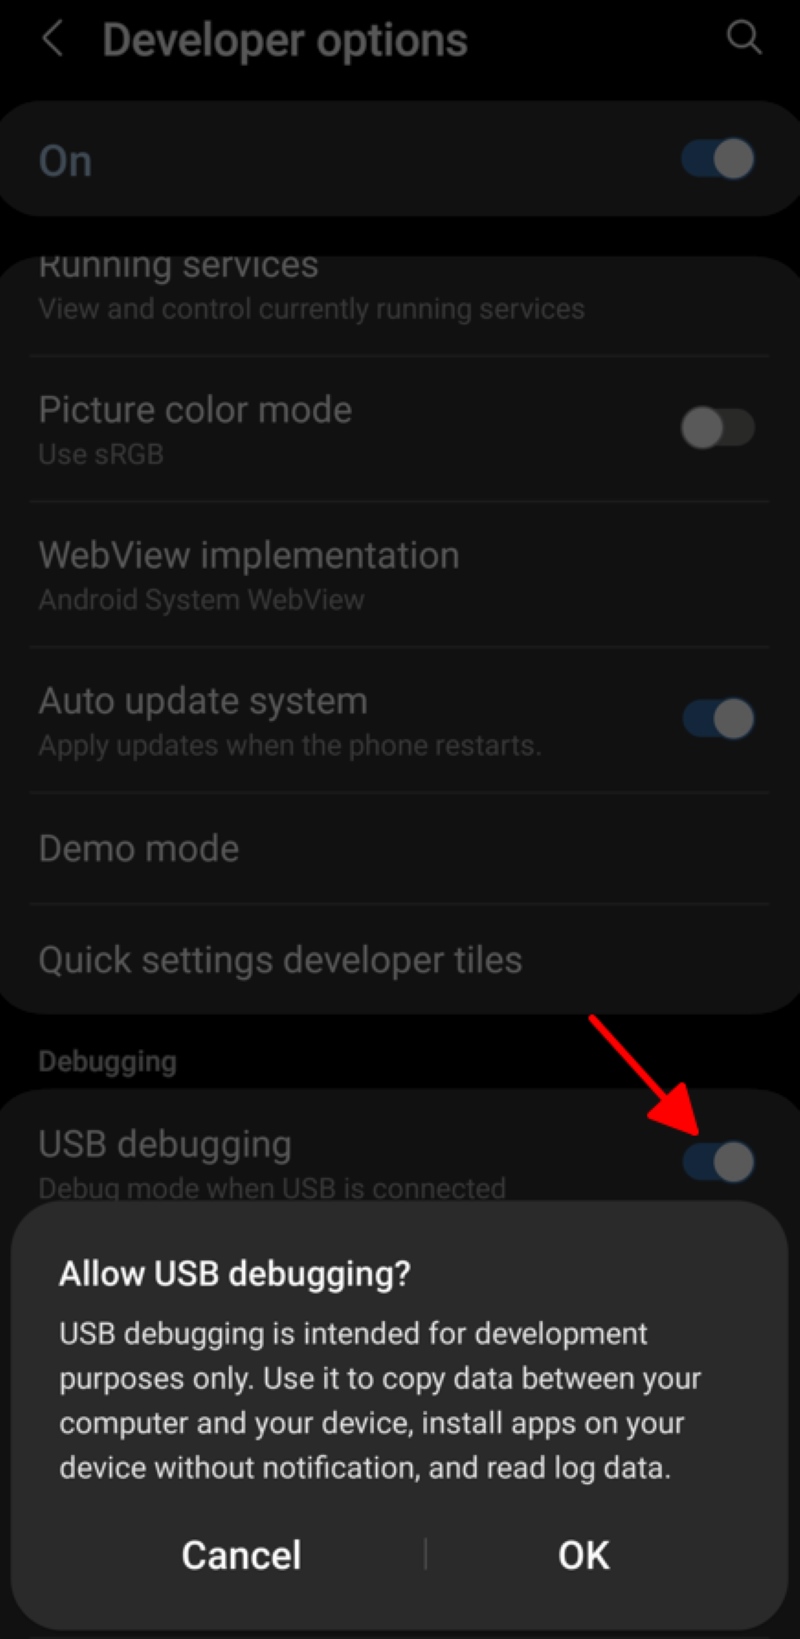 turn on the USB debugging on the Android phone